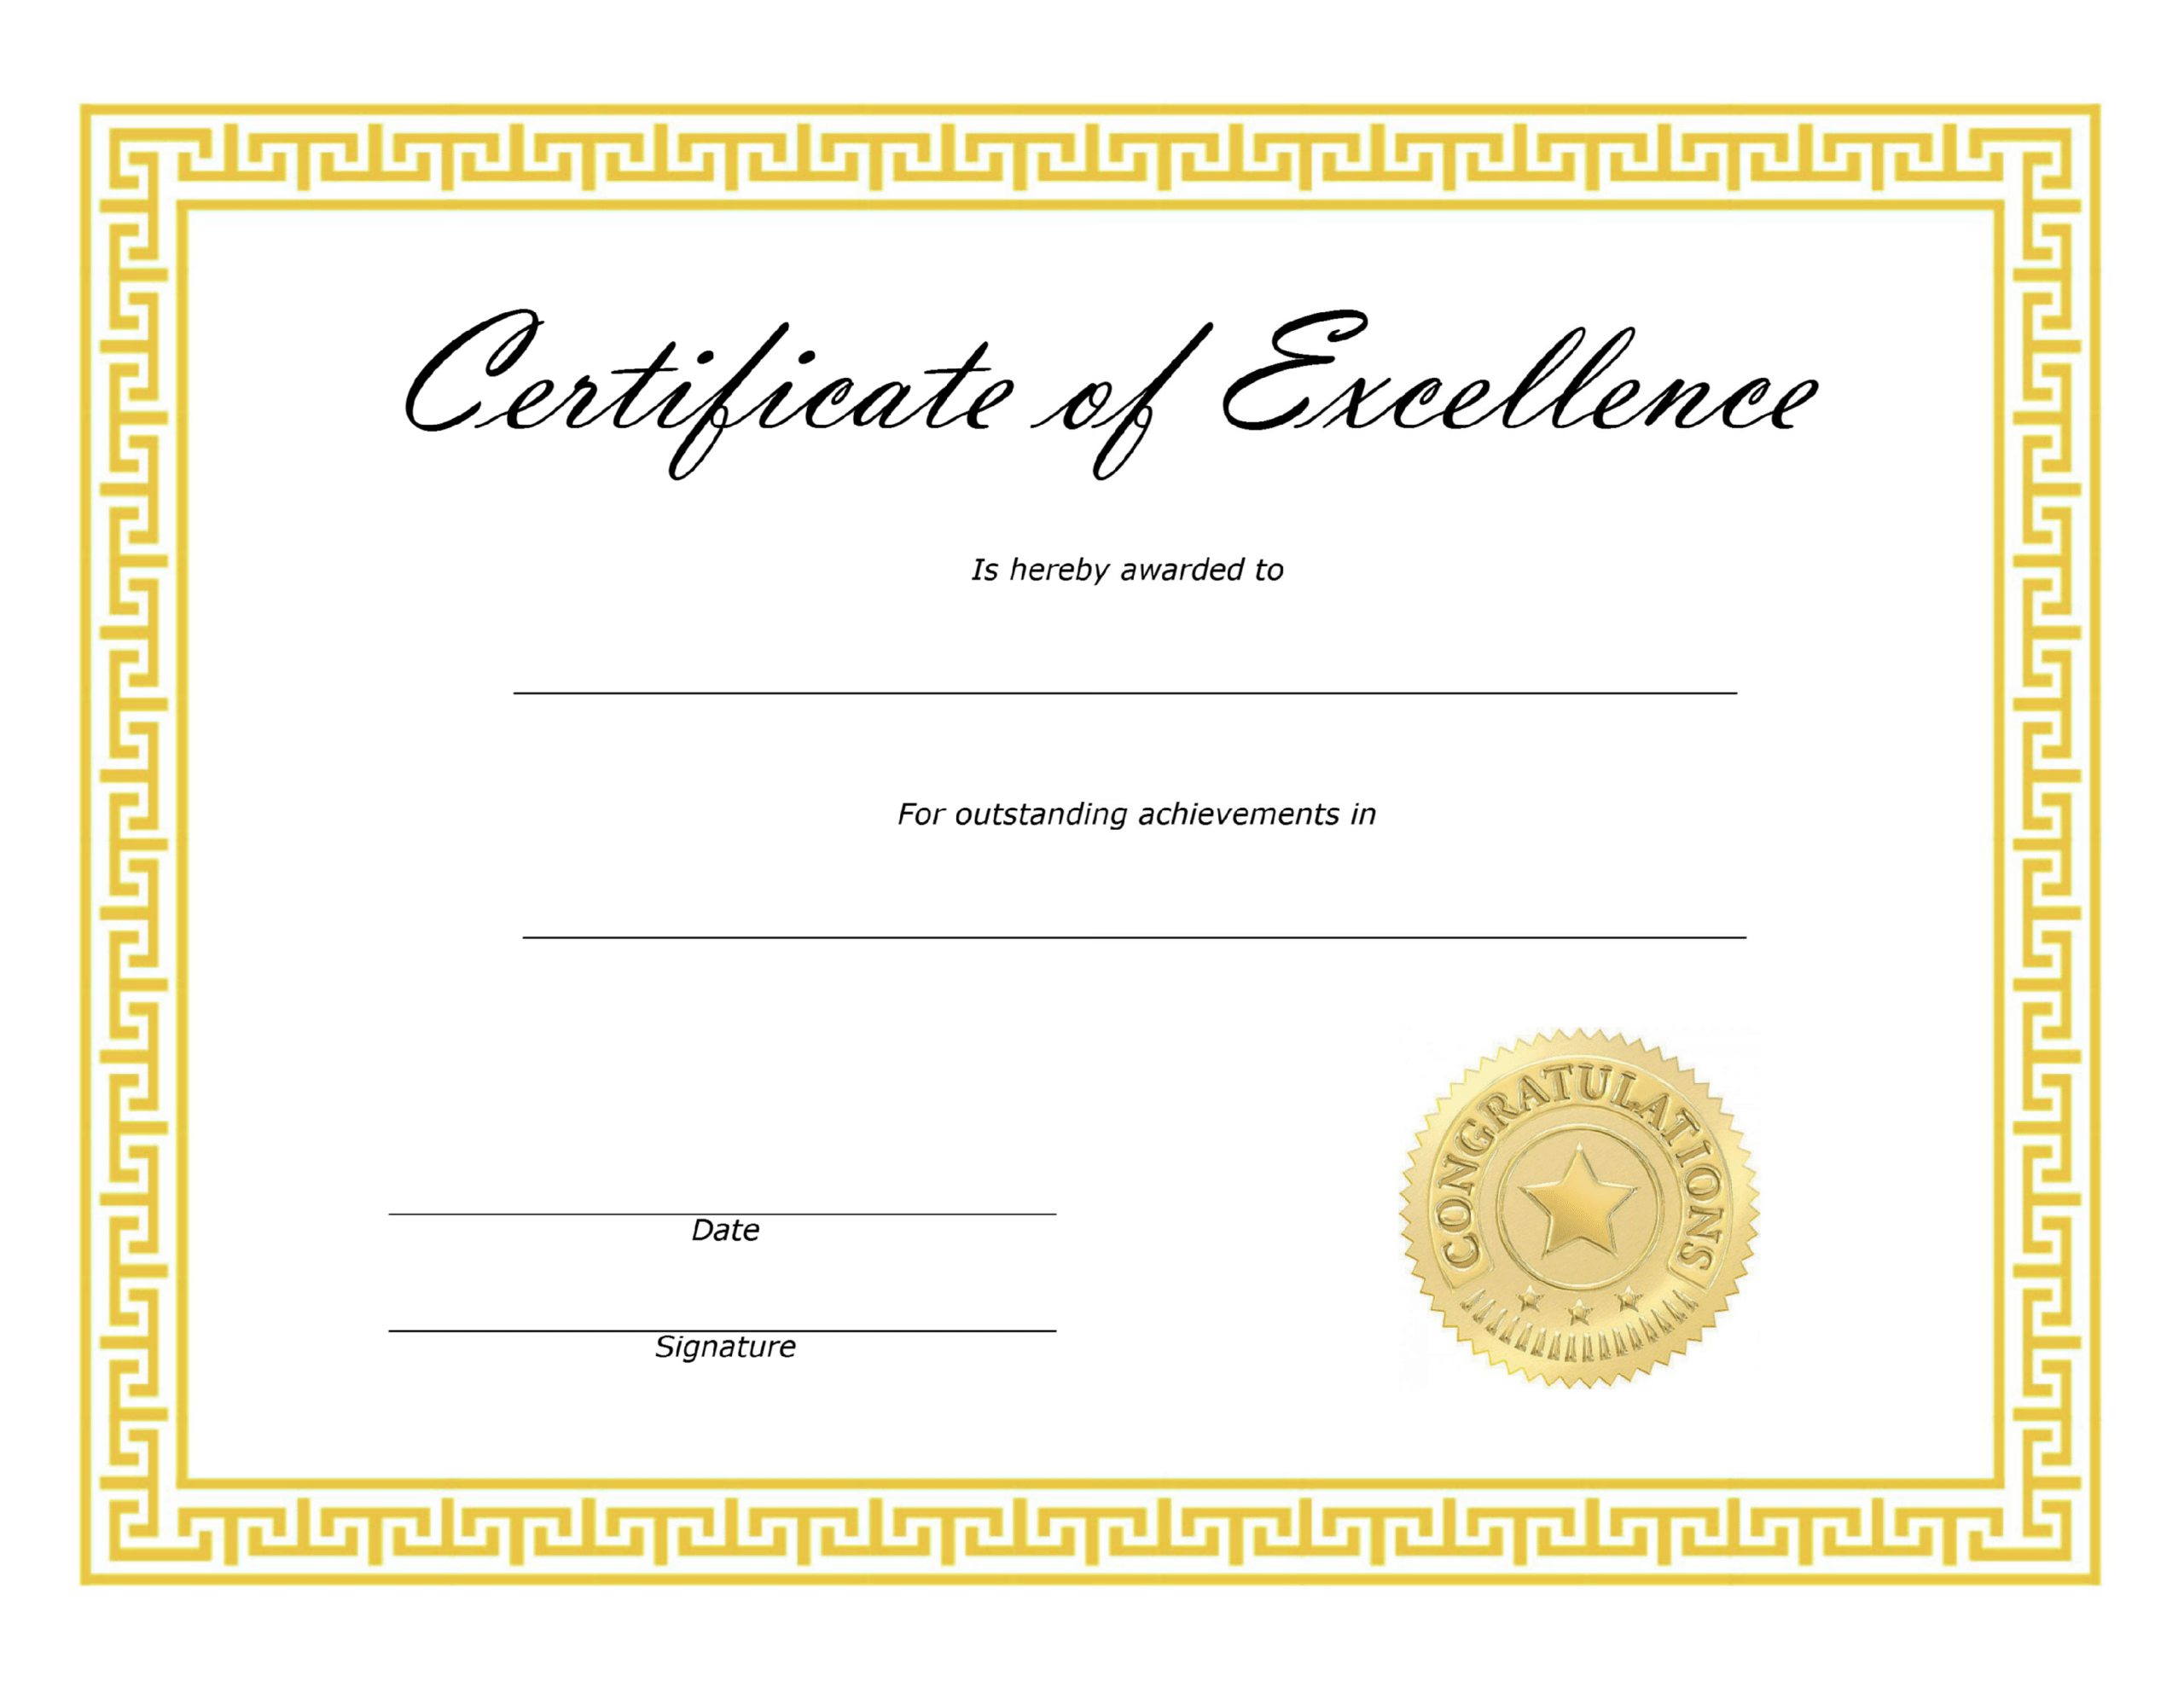 ❤️ Free Sample Certificate Of Excellence Templates❤️ Regarding Award Of Excellence Certificate Template